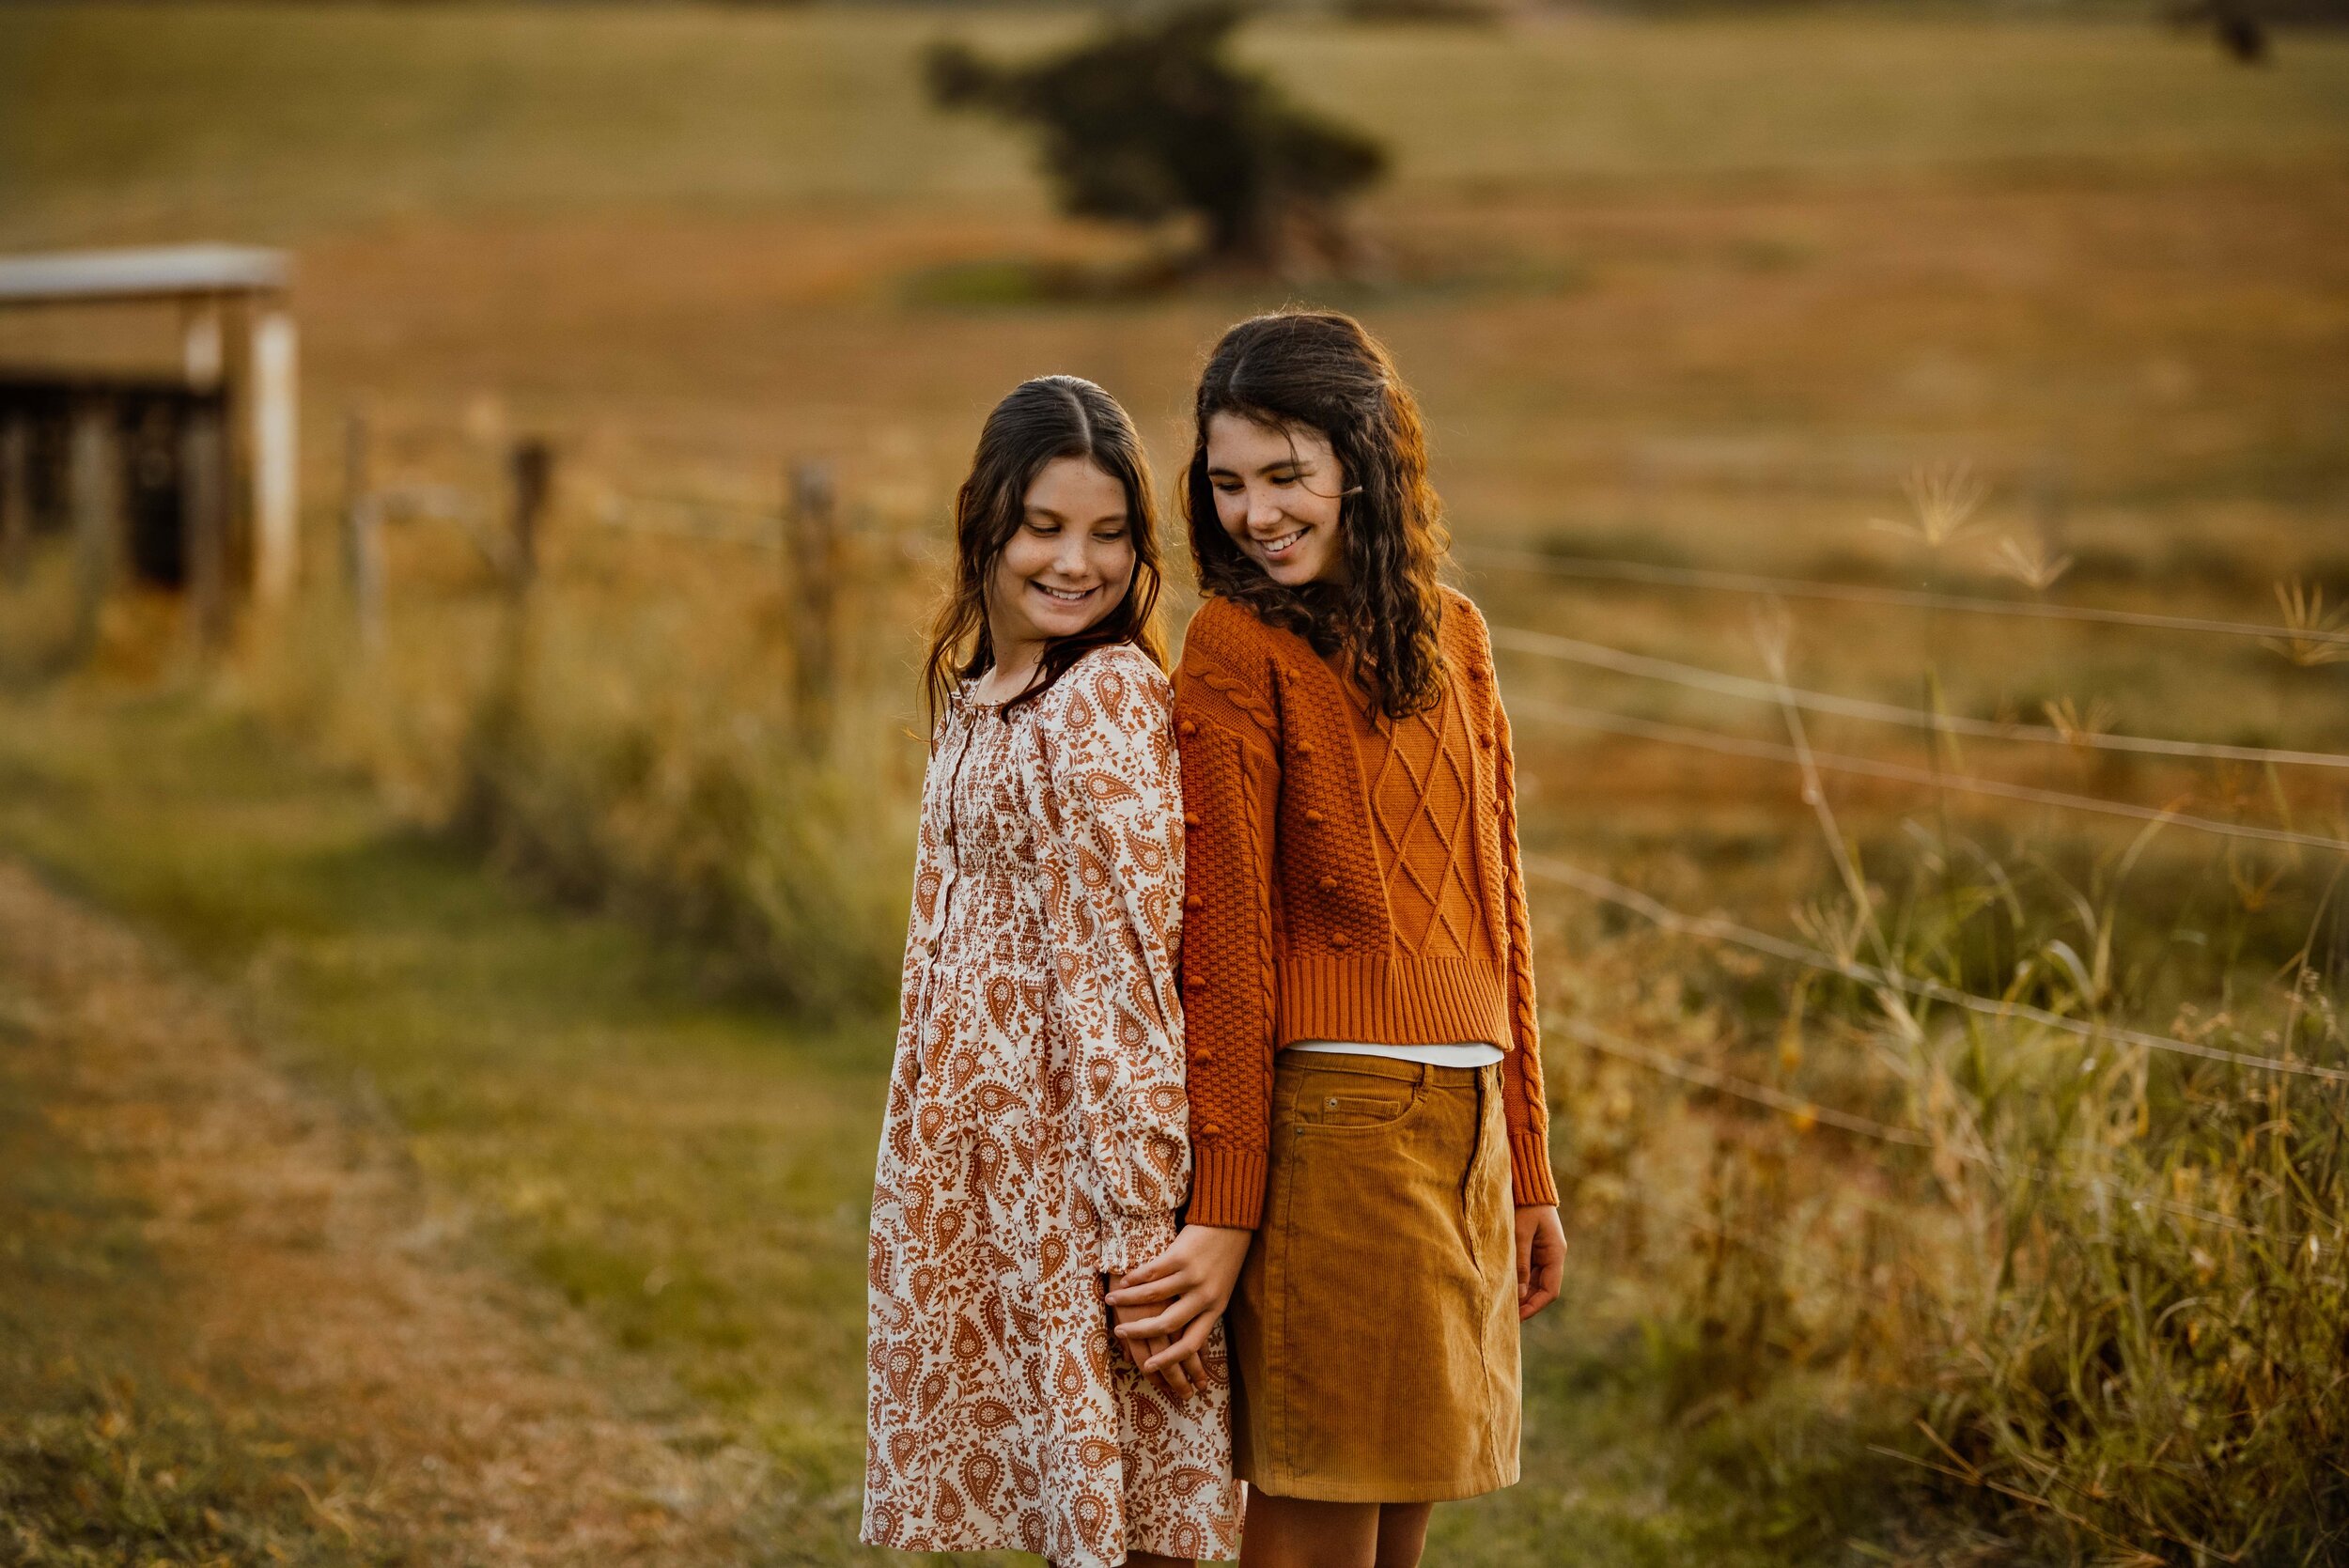 north-brisbane-country-family-photography.-26.jpg